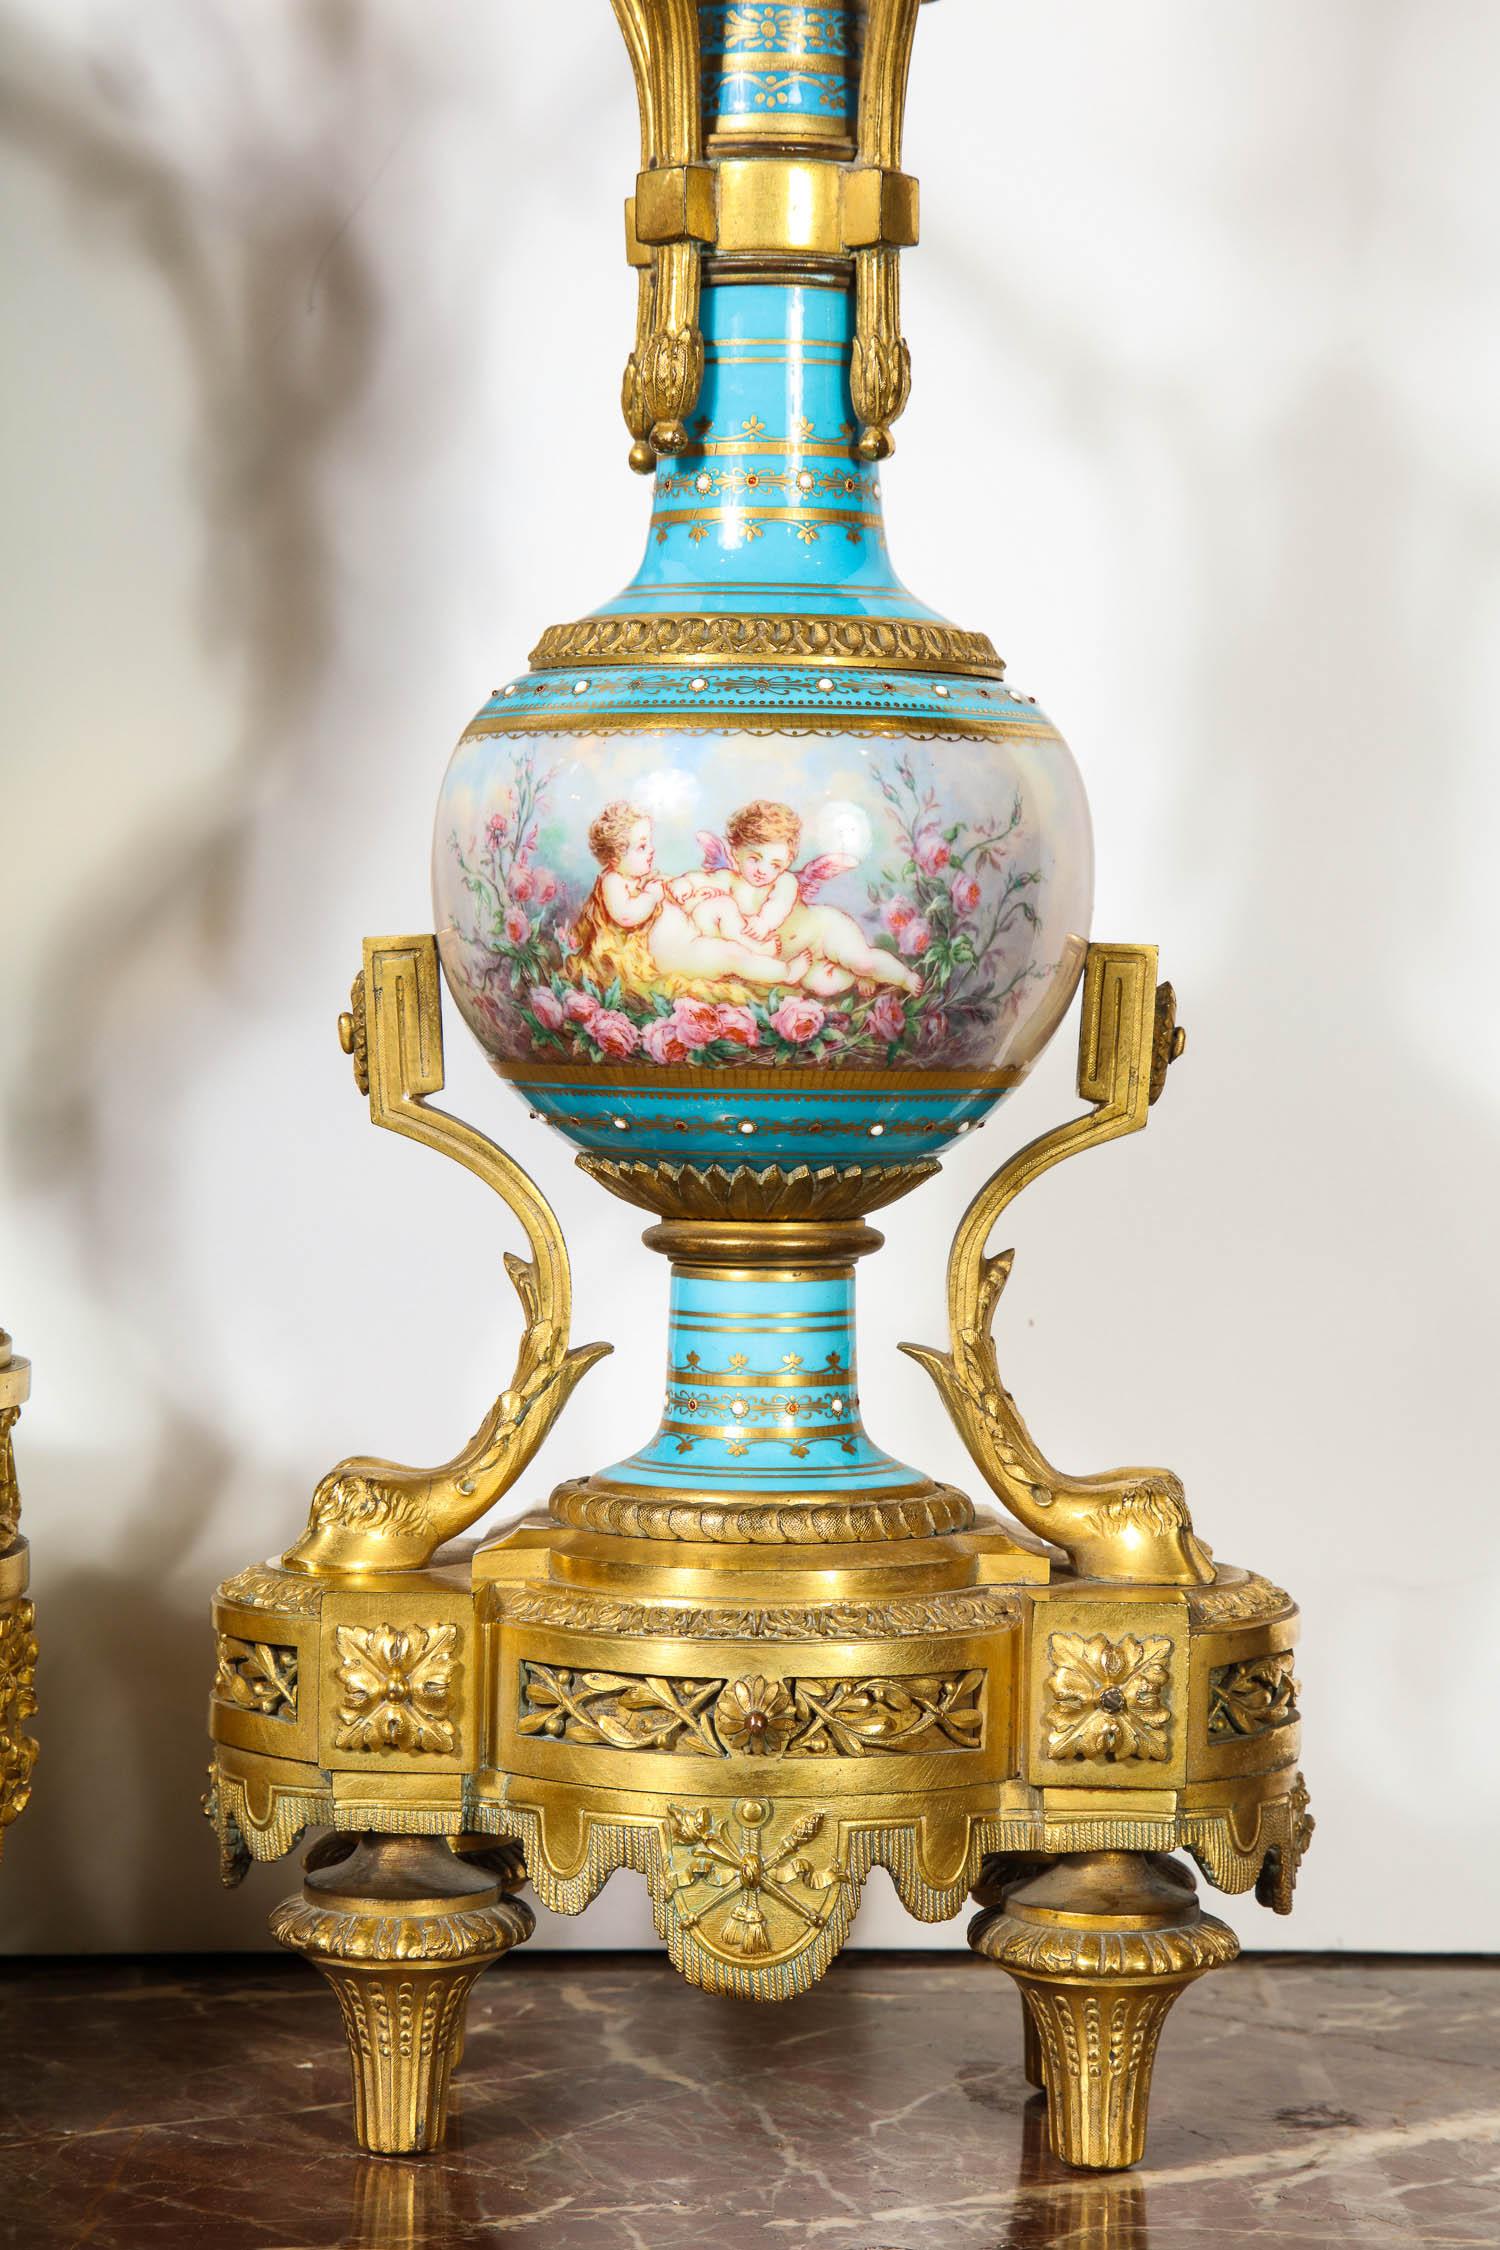 Exceptional French Ormolu-Mounted Turquoise Jeweled Sevres Porcelain Clock Set For Sale 3